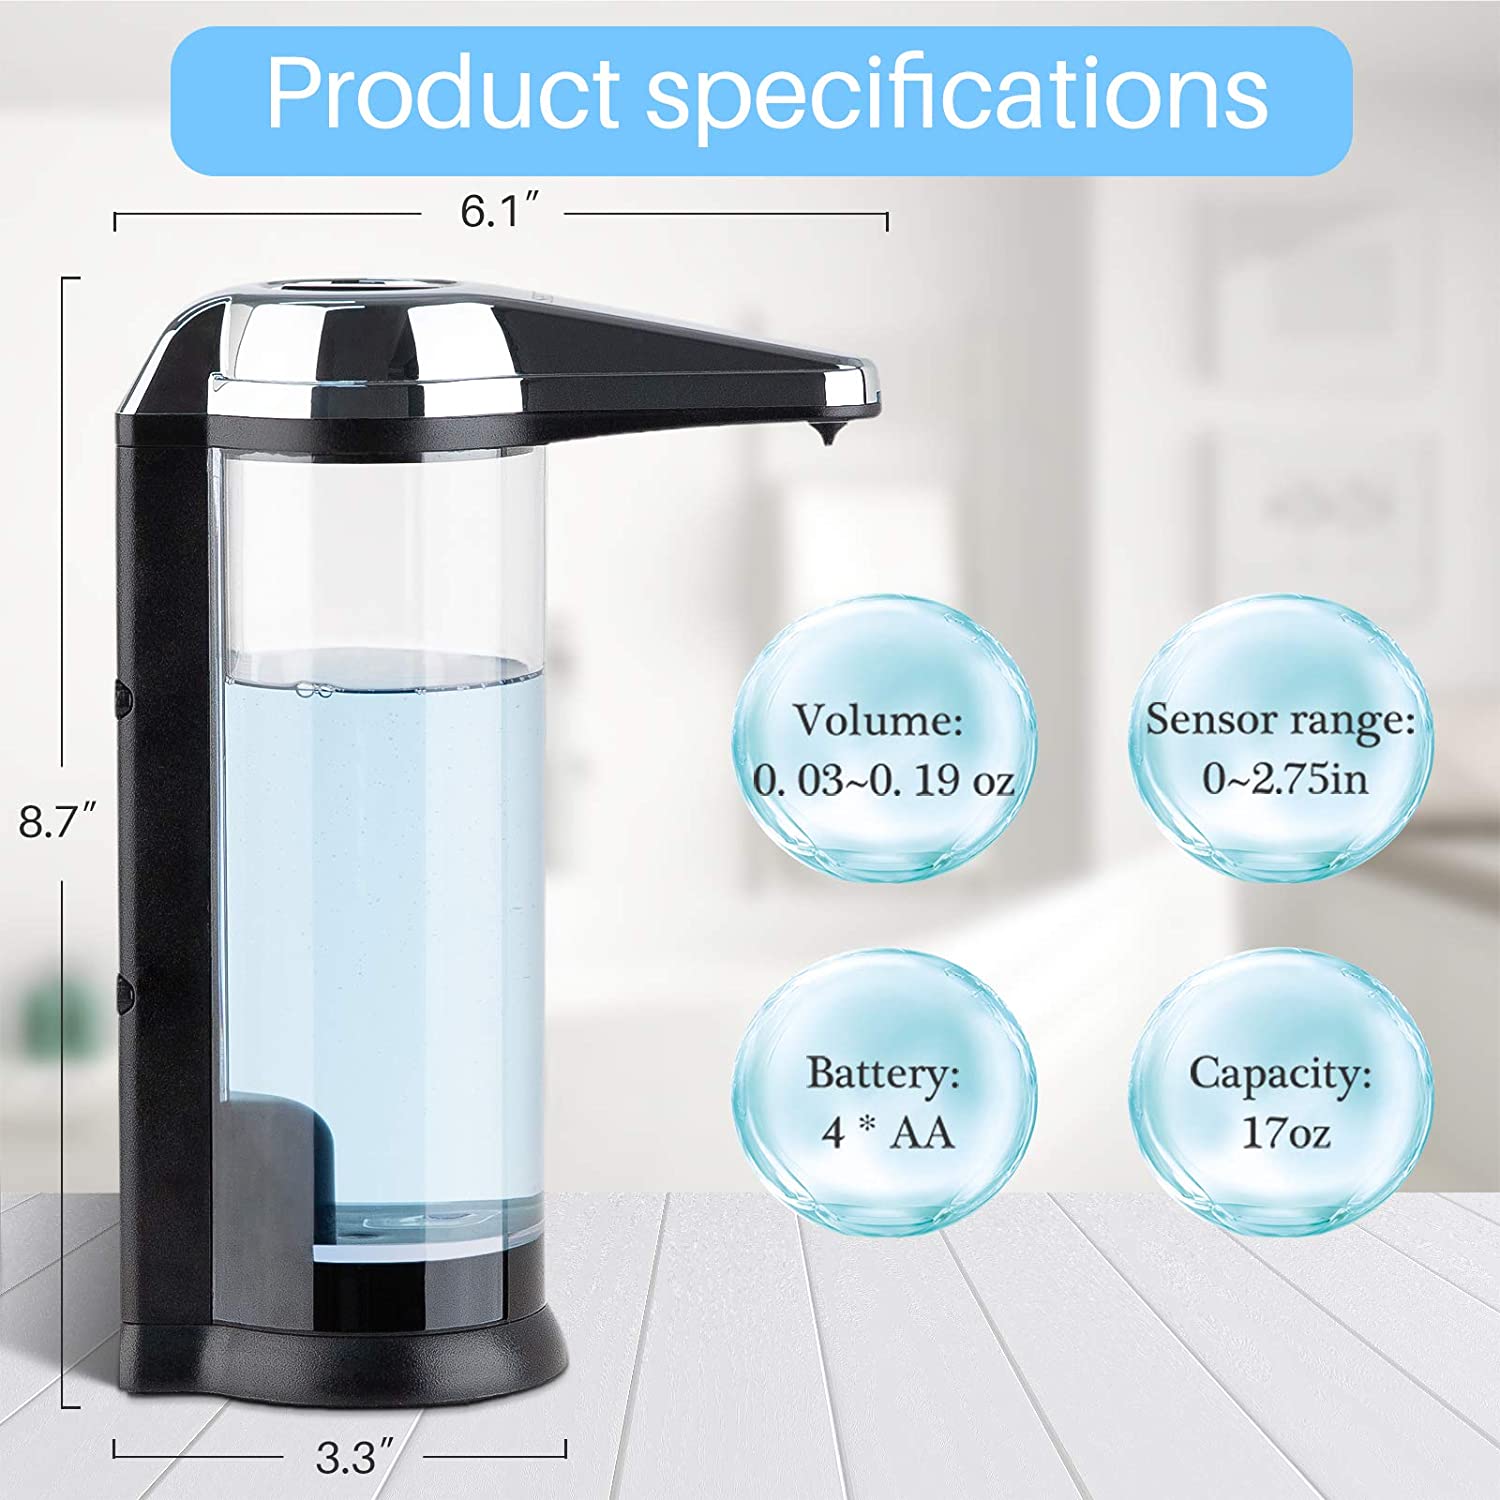 Secura 17oz Automatic Liquid Soap Dispenser, Touchless Battery Operated  Hand Soap Dispenser with Adjustable Soap Dispensing Volume Control Dial,  Perfect for Commercial or Household Use (Chrome) - The Secura